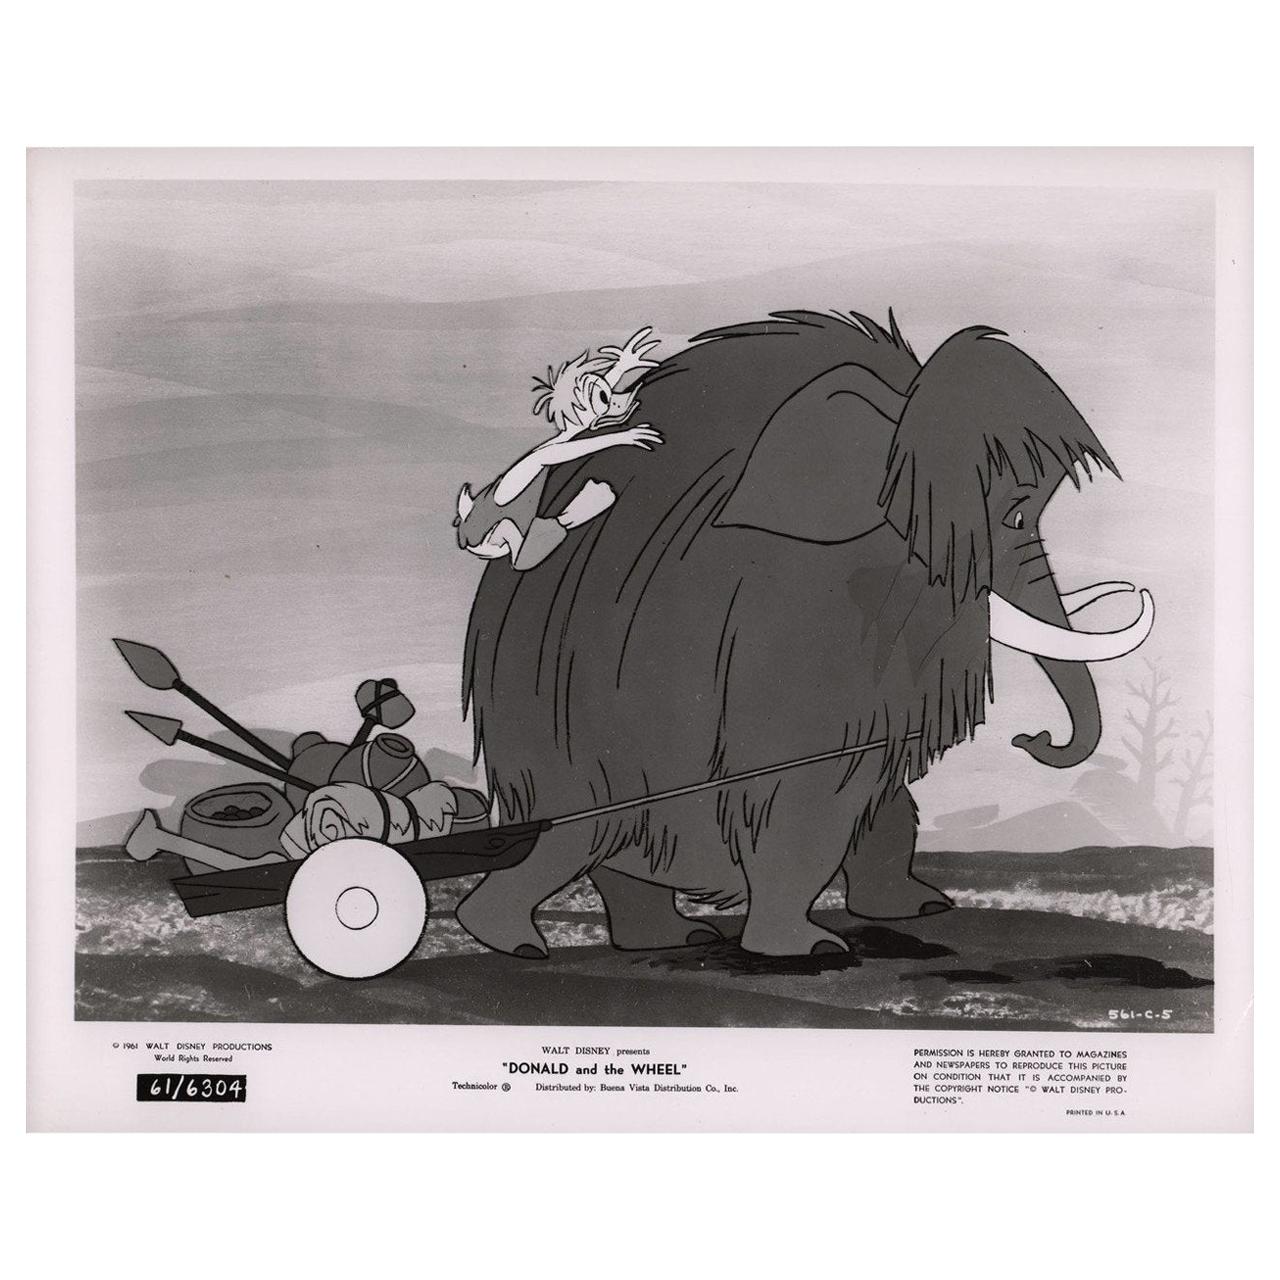 Donald and the Wheel 1961 U.S. Silver Gelatin Single-Weight Photo For Sale